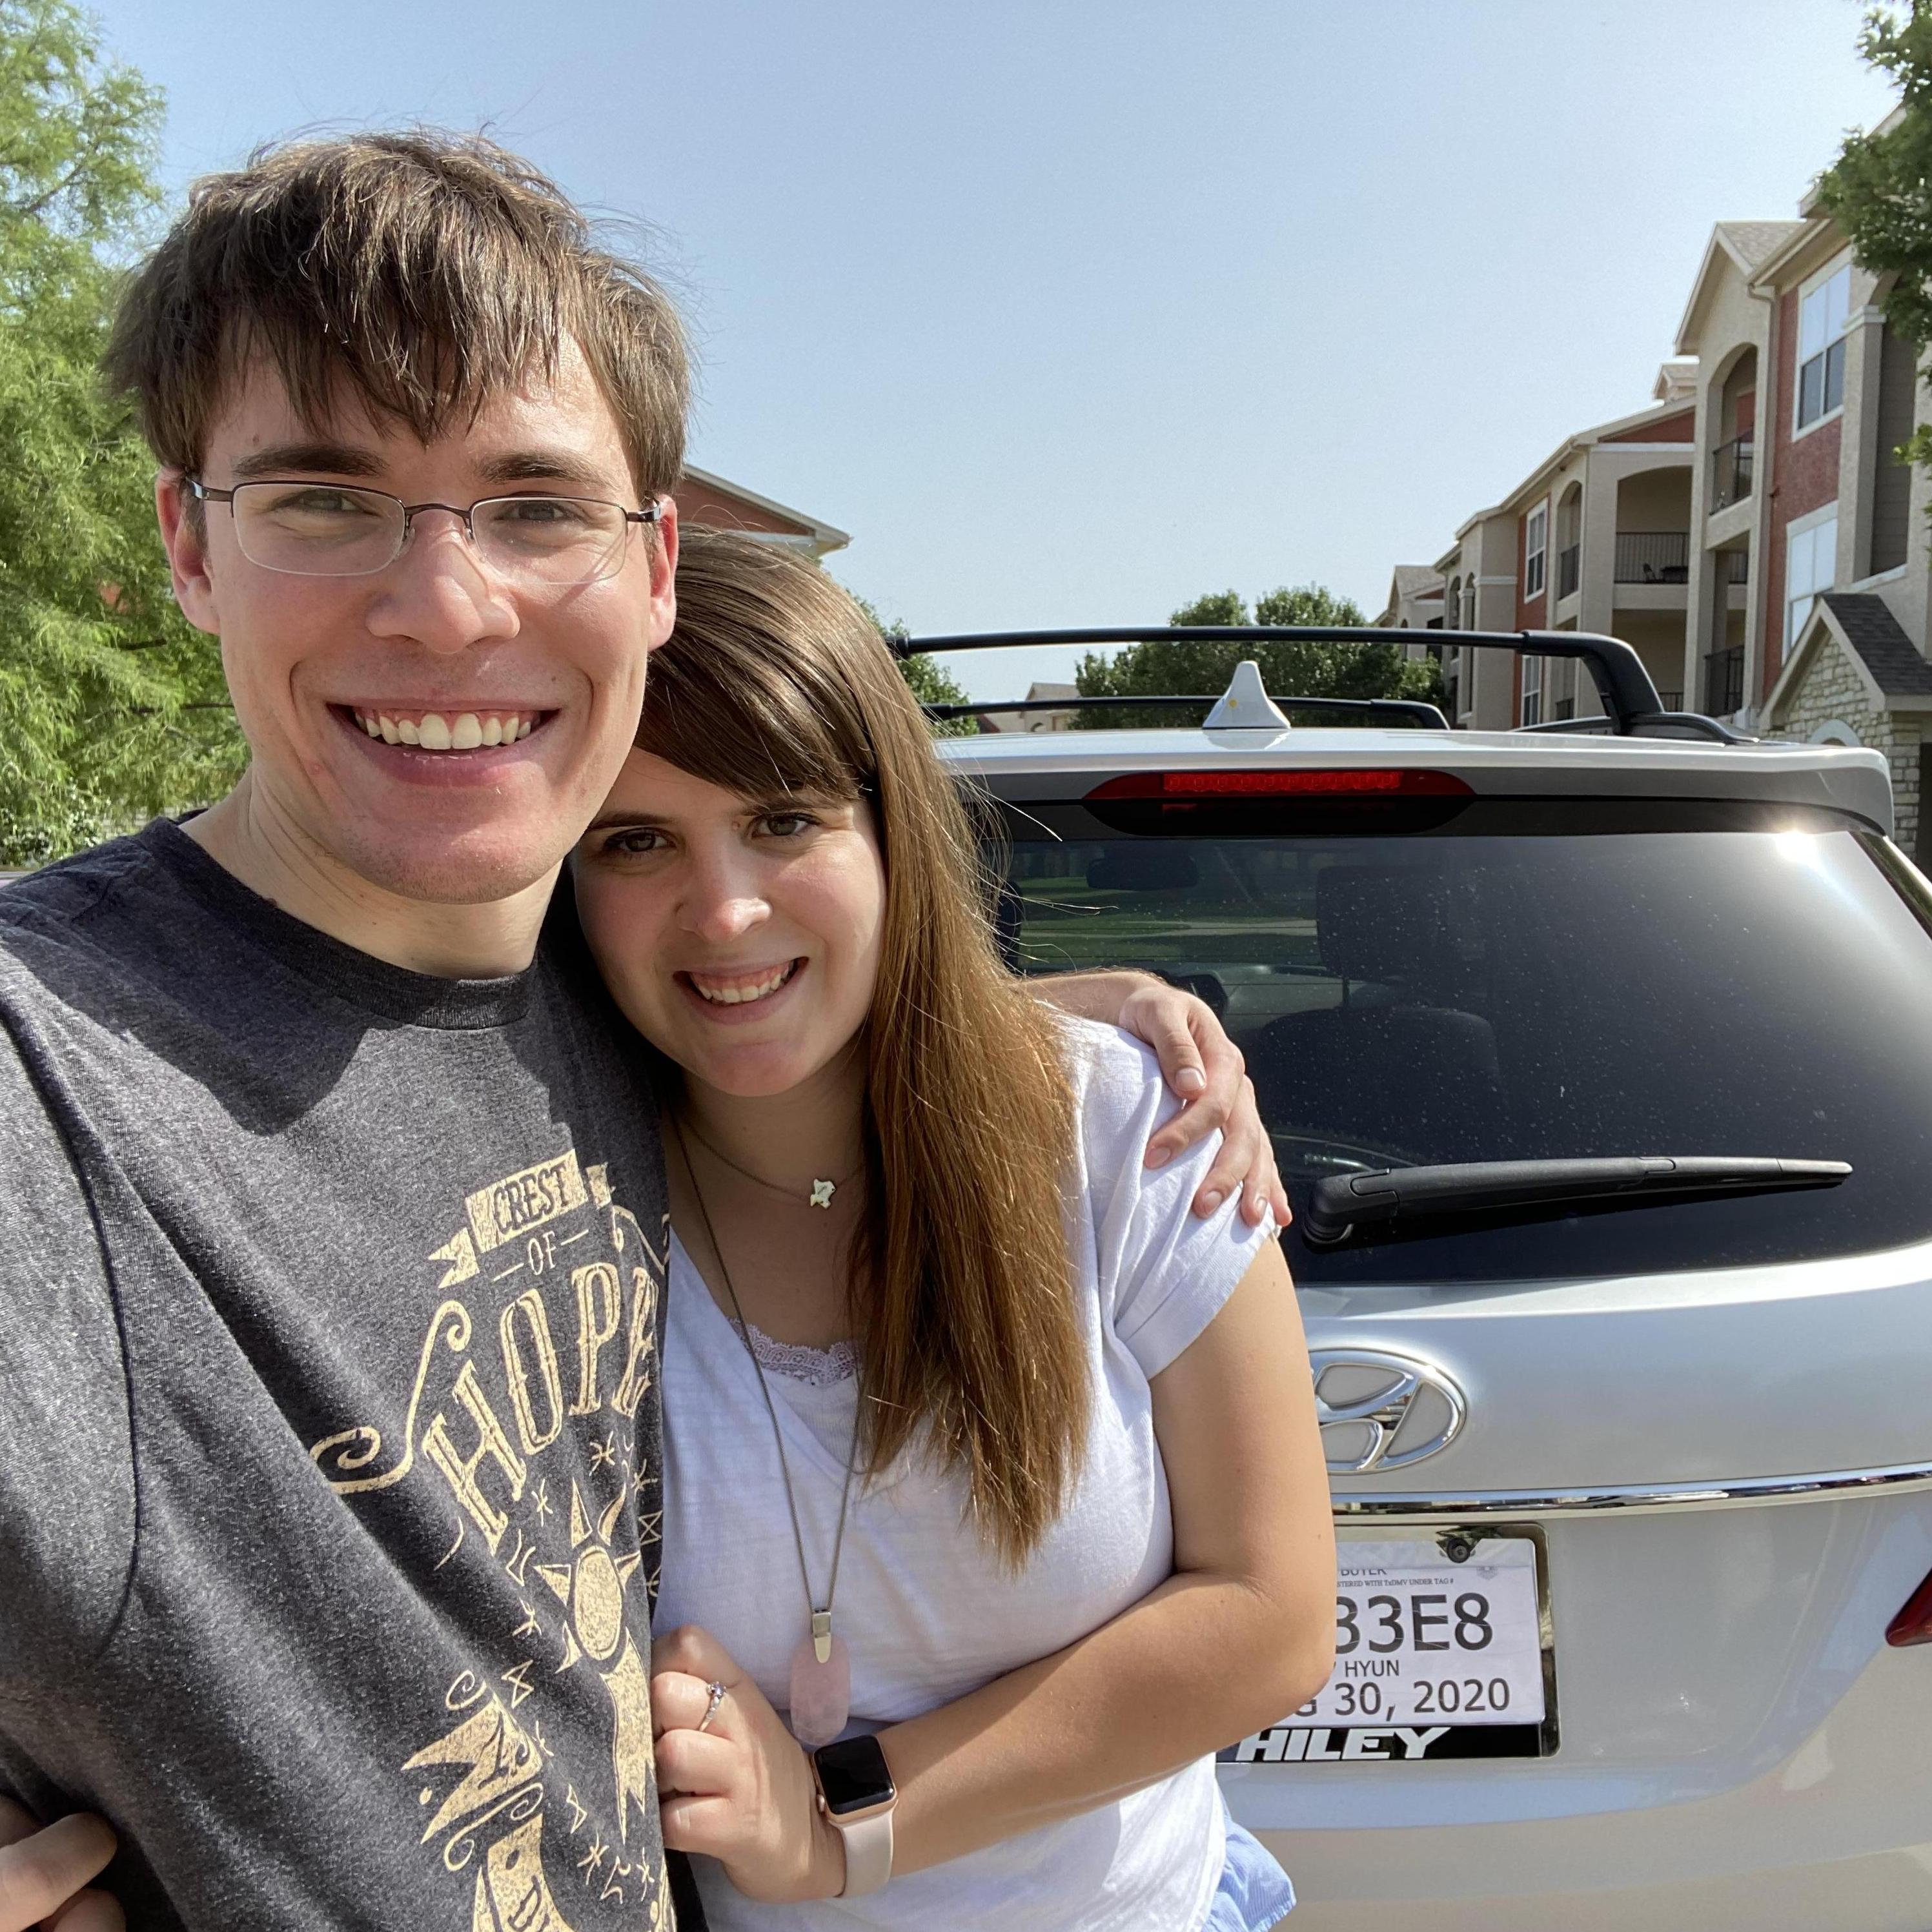 We took this picture right after Jacquie bought her new car, and right before she met Ryan's parents for the first time!